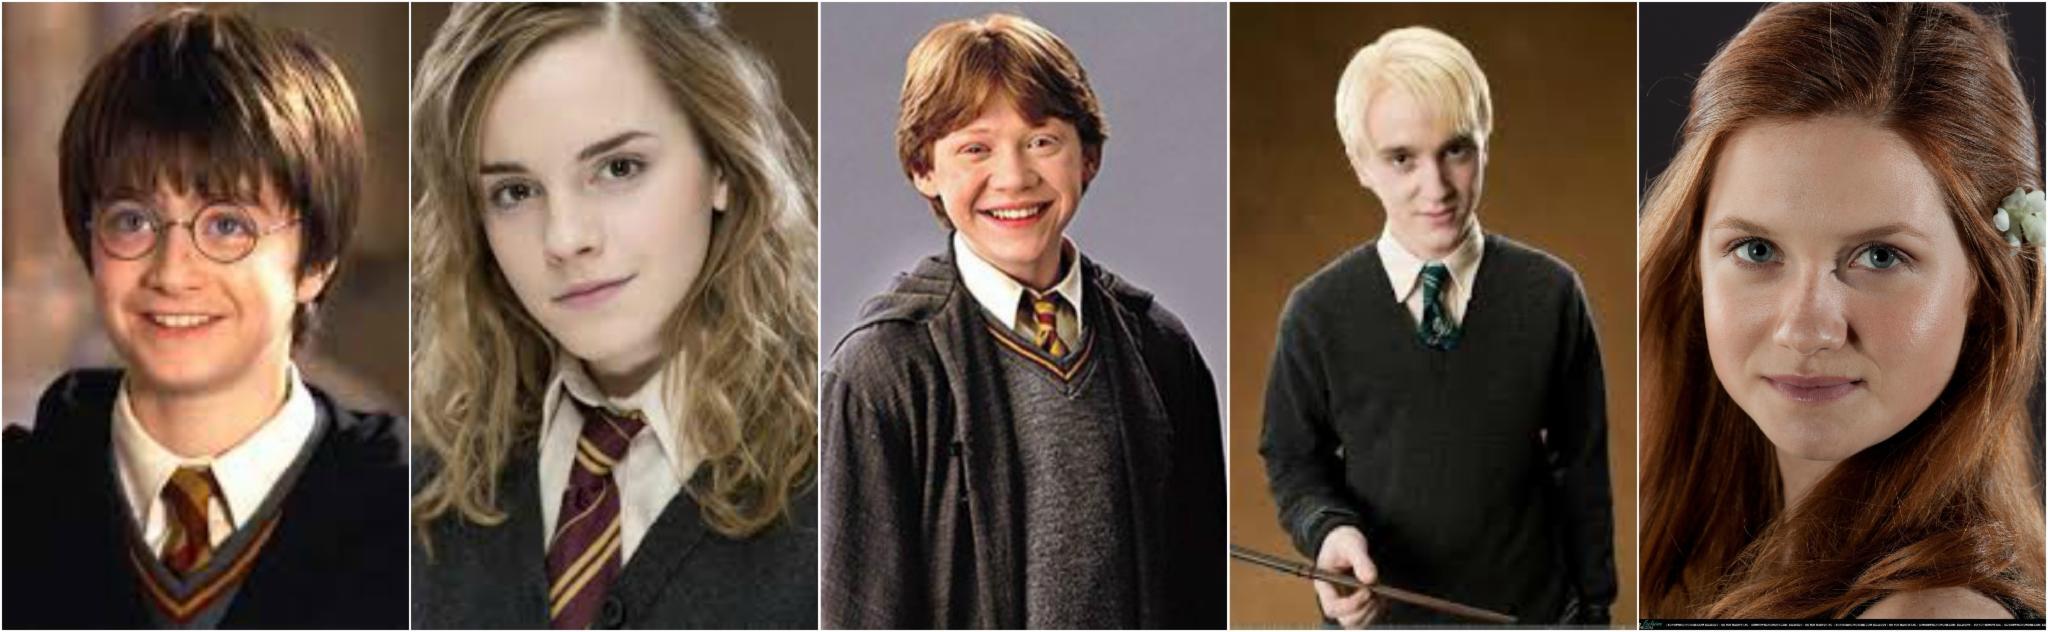 Which Harry Potter character are you? (13) - Personality Quiz